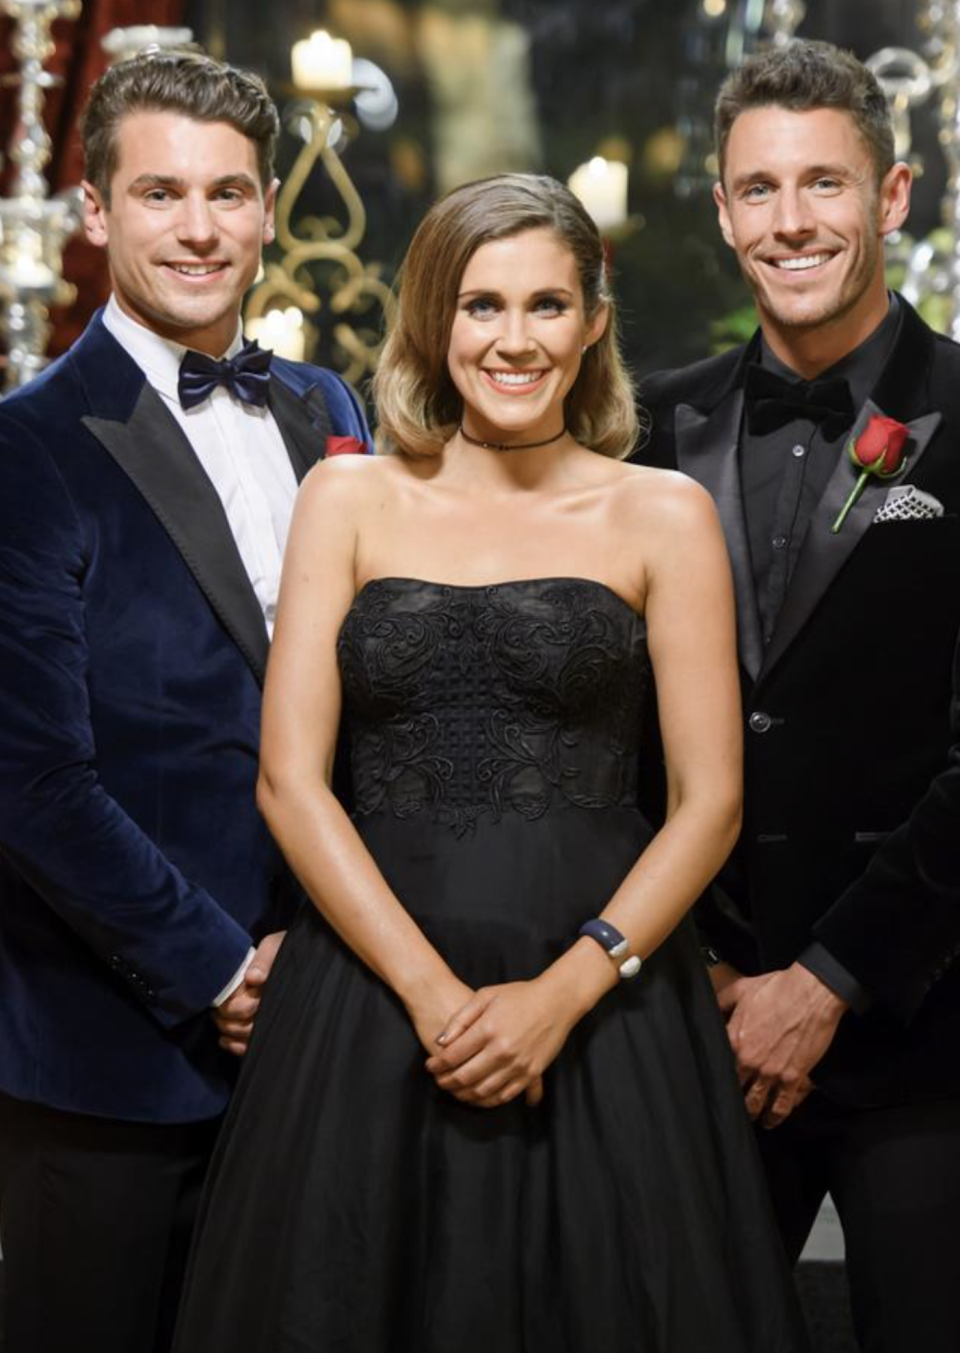 Georgia's final two suitors were Matty J and Lee Elliot. Photo: Network 10 